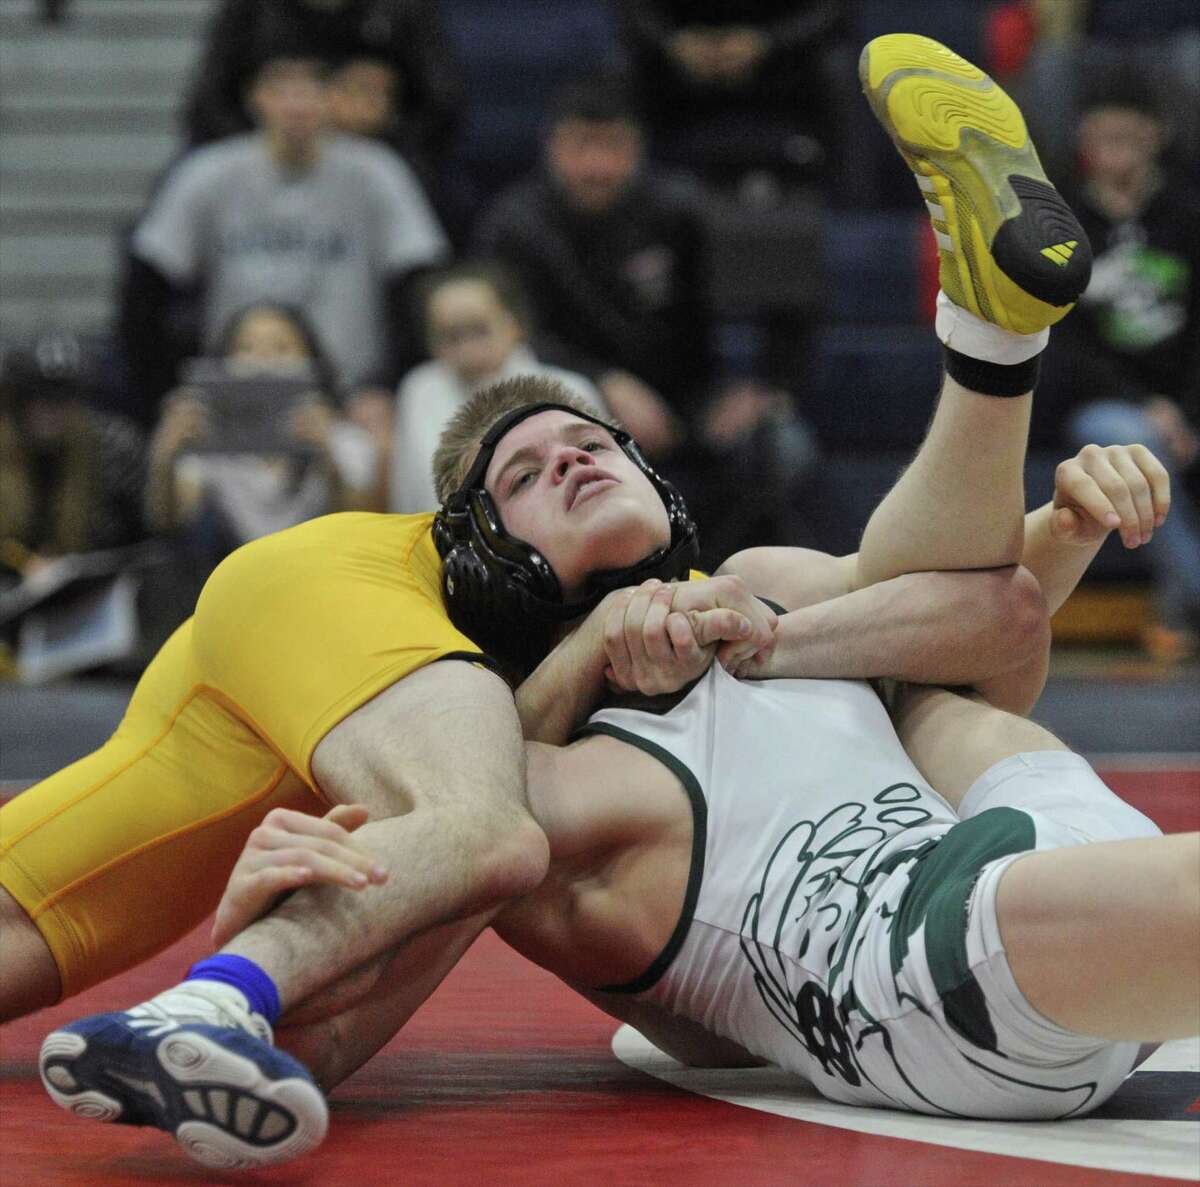 New Milford's Tyler Schultz and Newtown's Aaron Occhipinti wrestle for the 132 pound weight class SWC wrestling championship on Saturday, February 11, 2017, at New Fairfield High School, in New Fairfield, Conn.